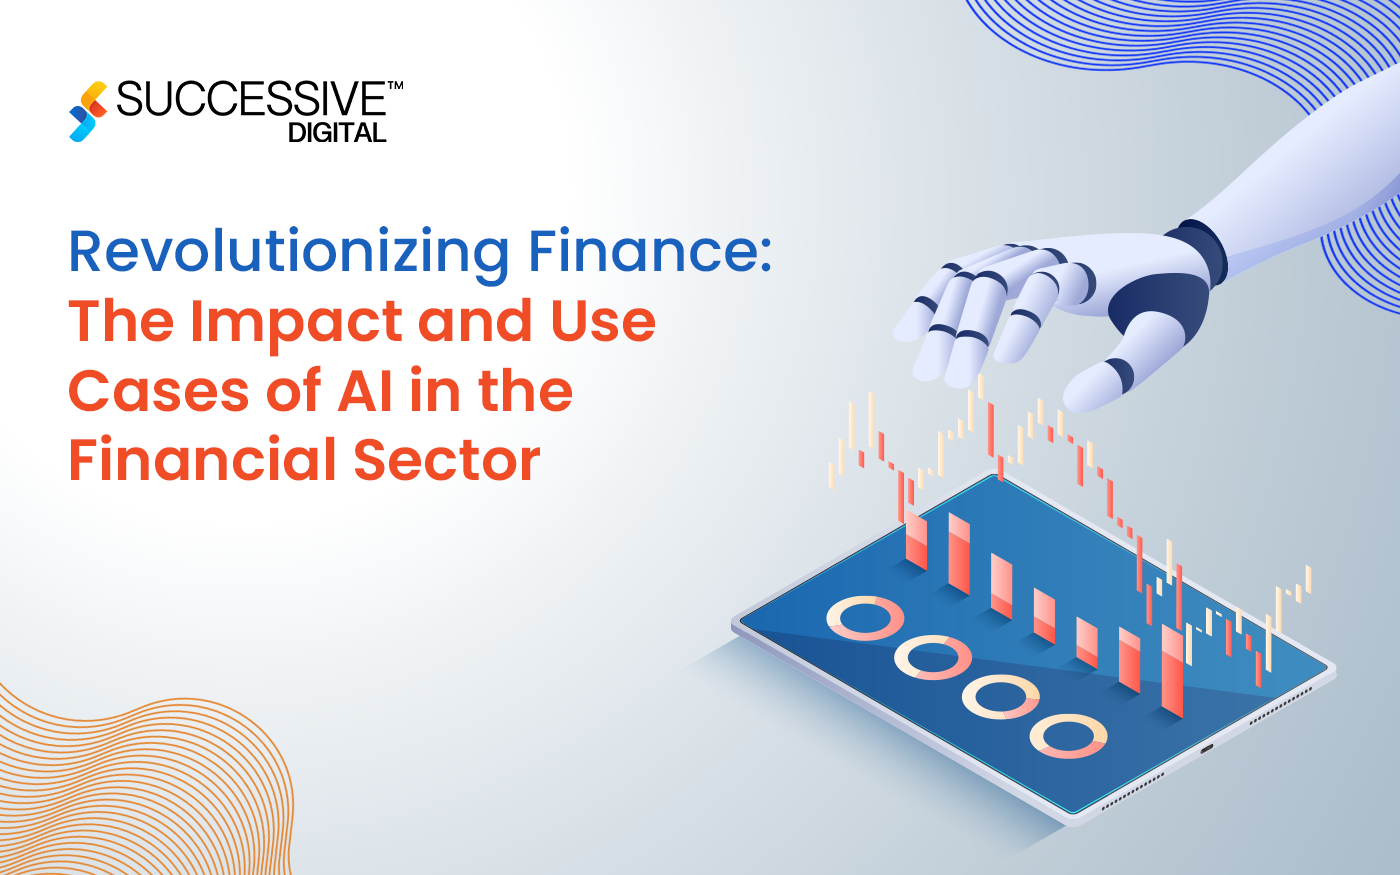 Revolutionizing Finance: The Impact and Use Cases of AI in the Financial Sector